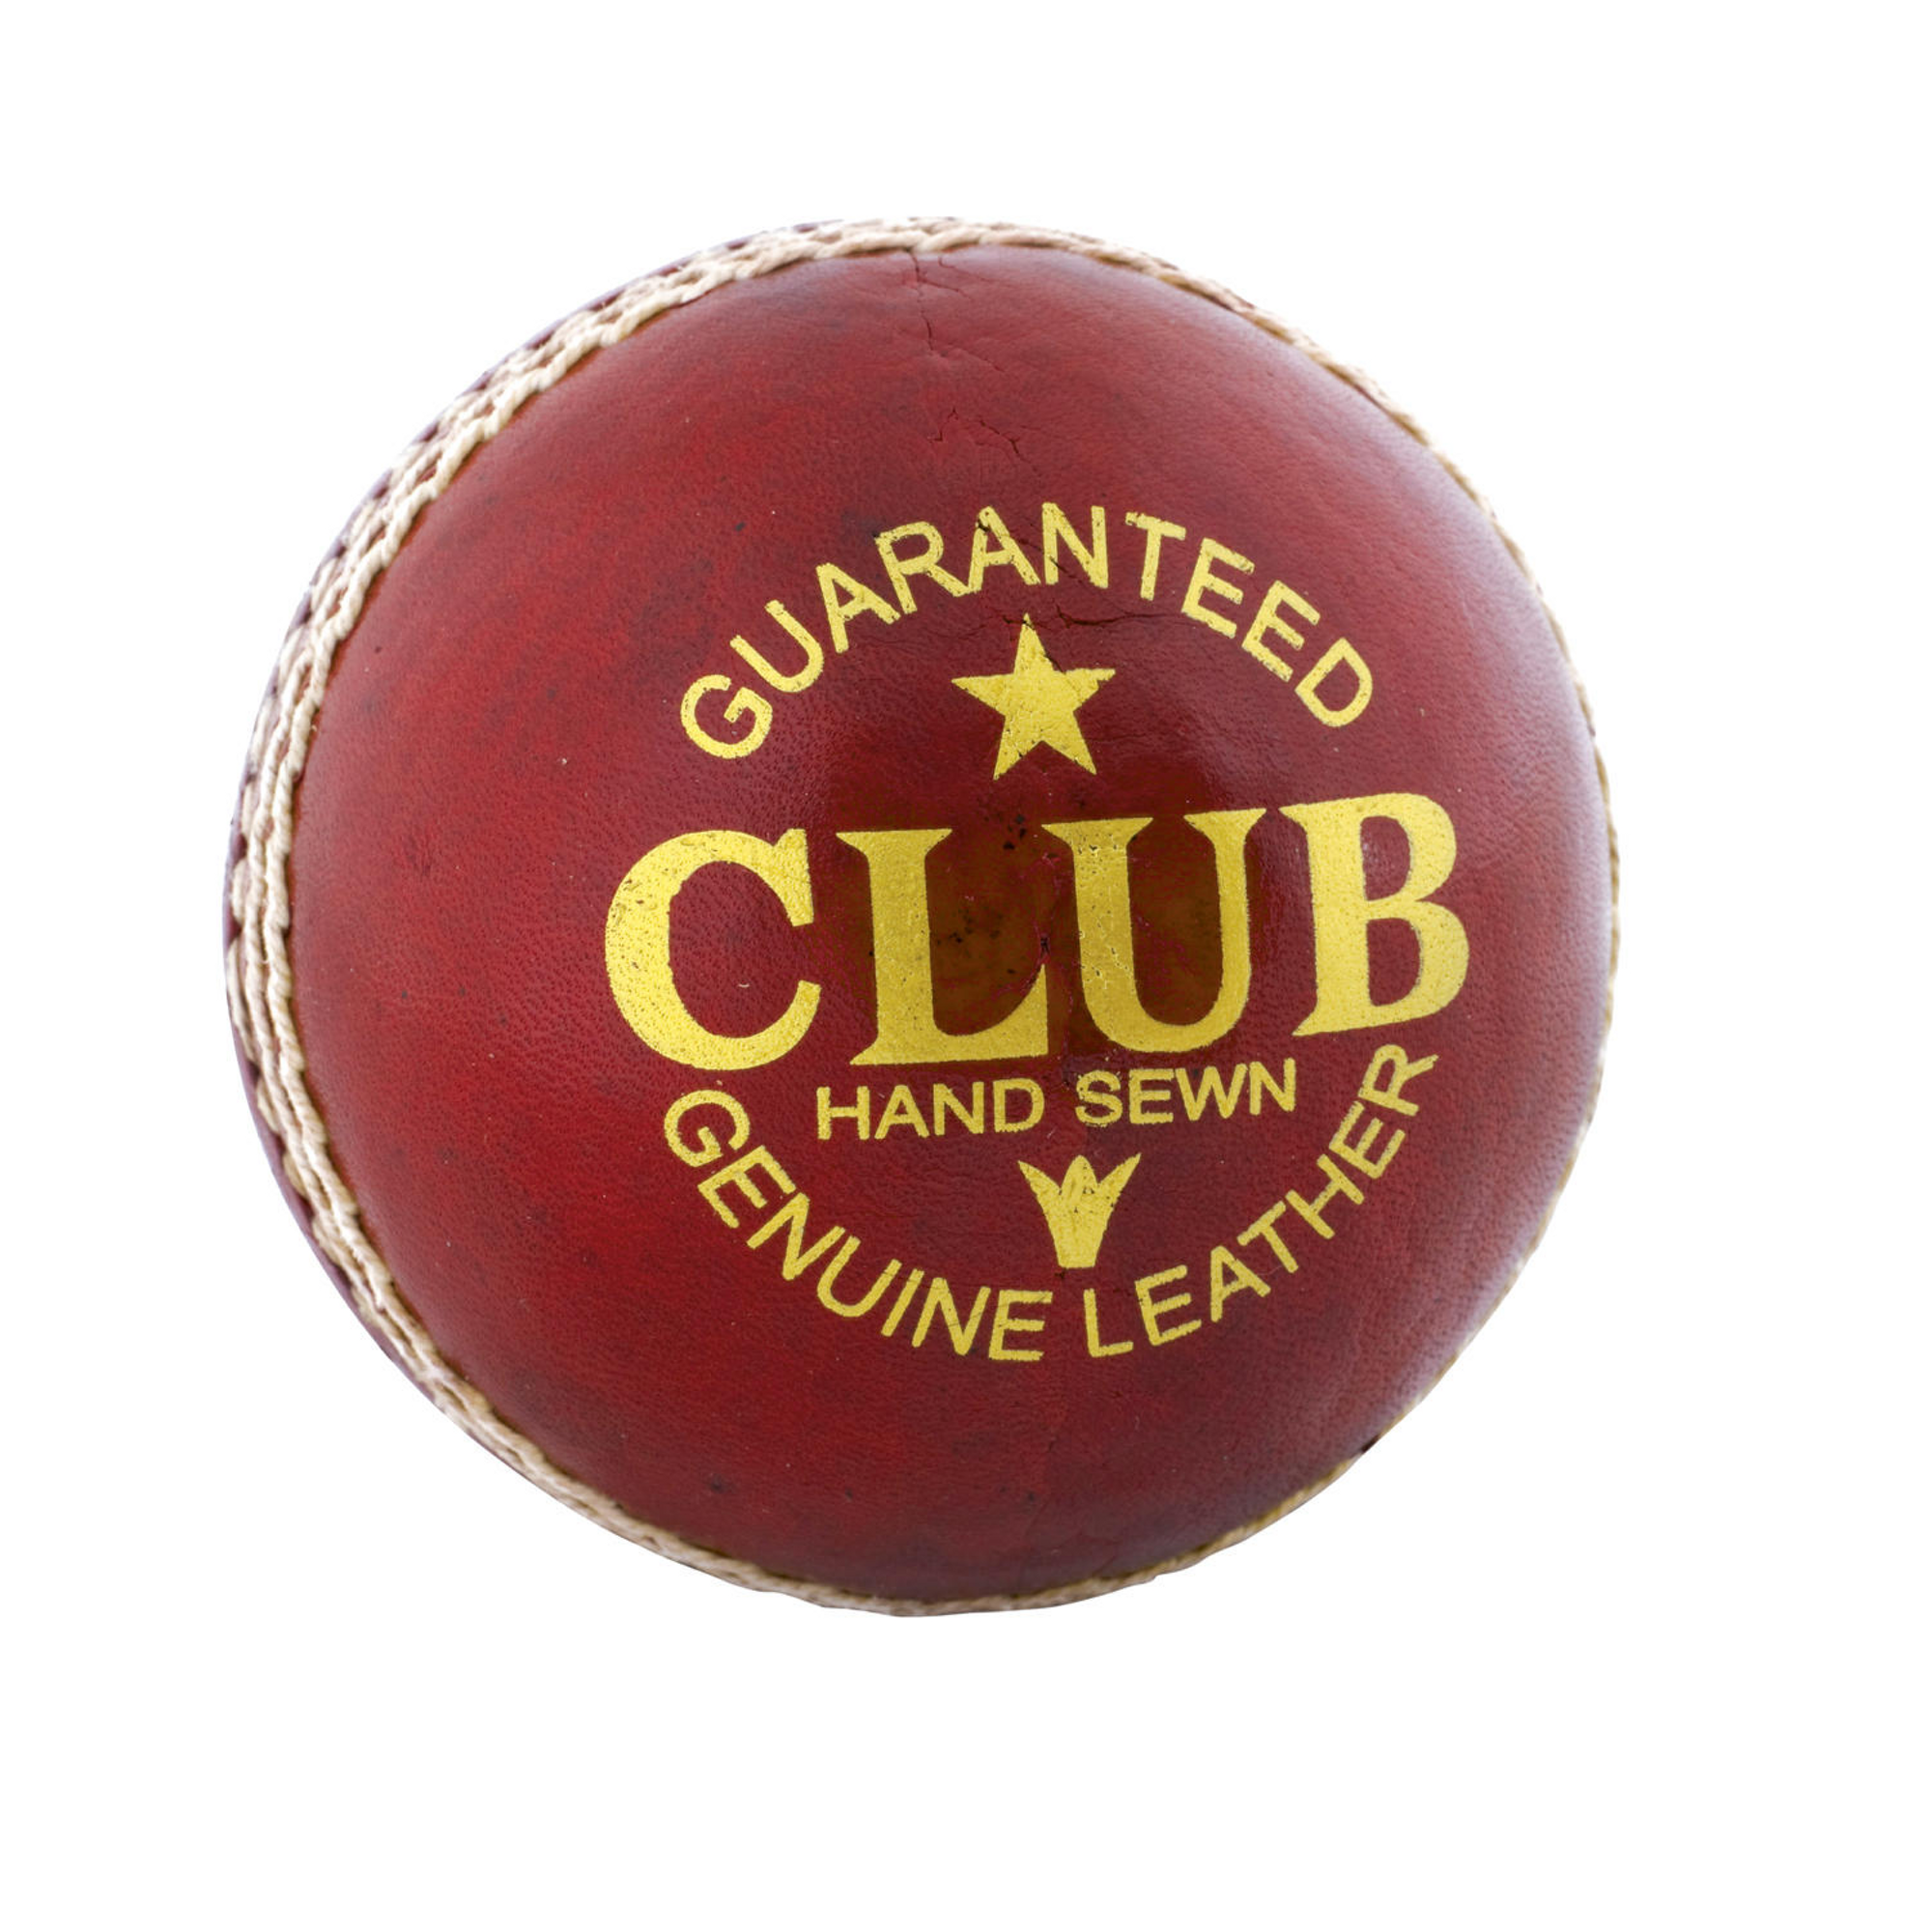 Readers Special School Leather Red Cricket Balls Size Youths 4.75oz NEW 